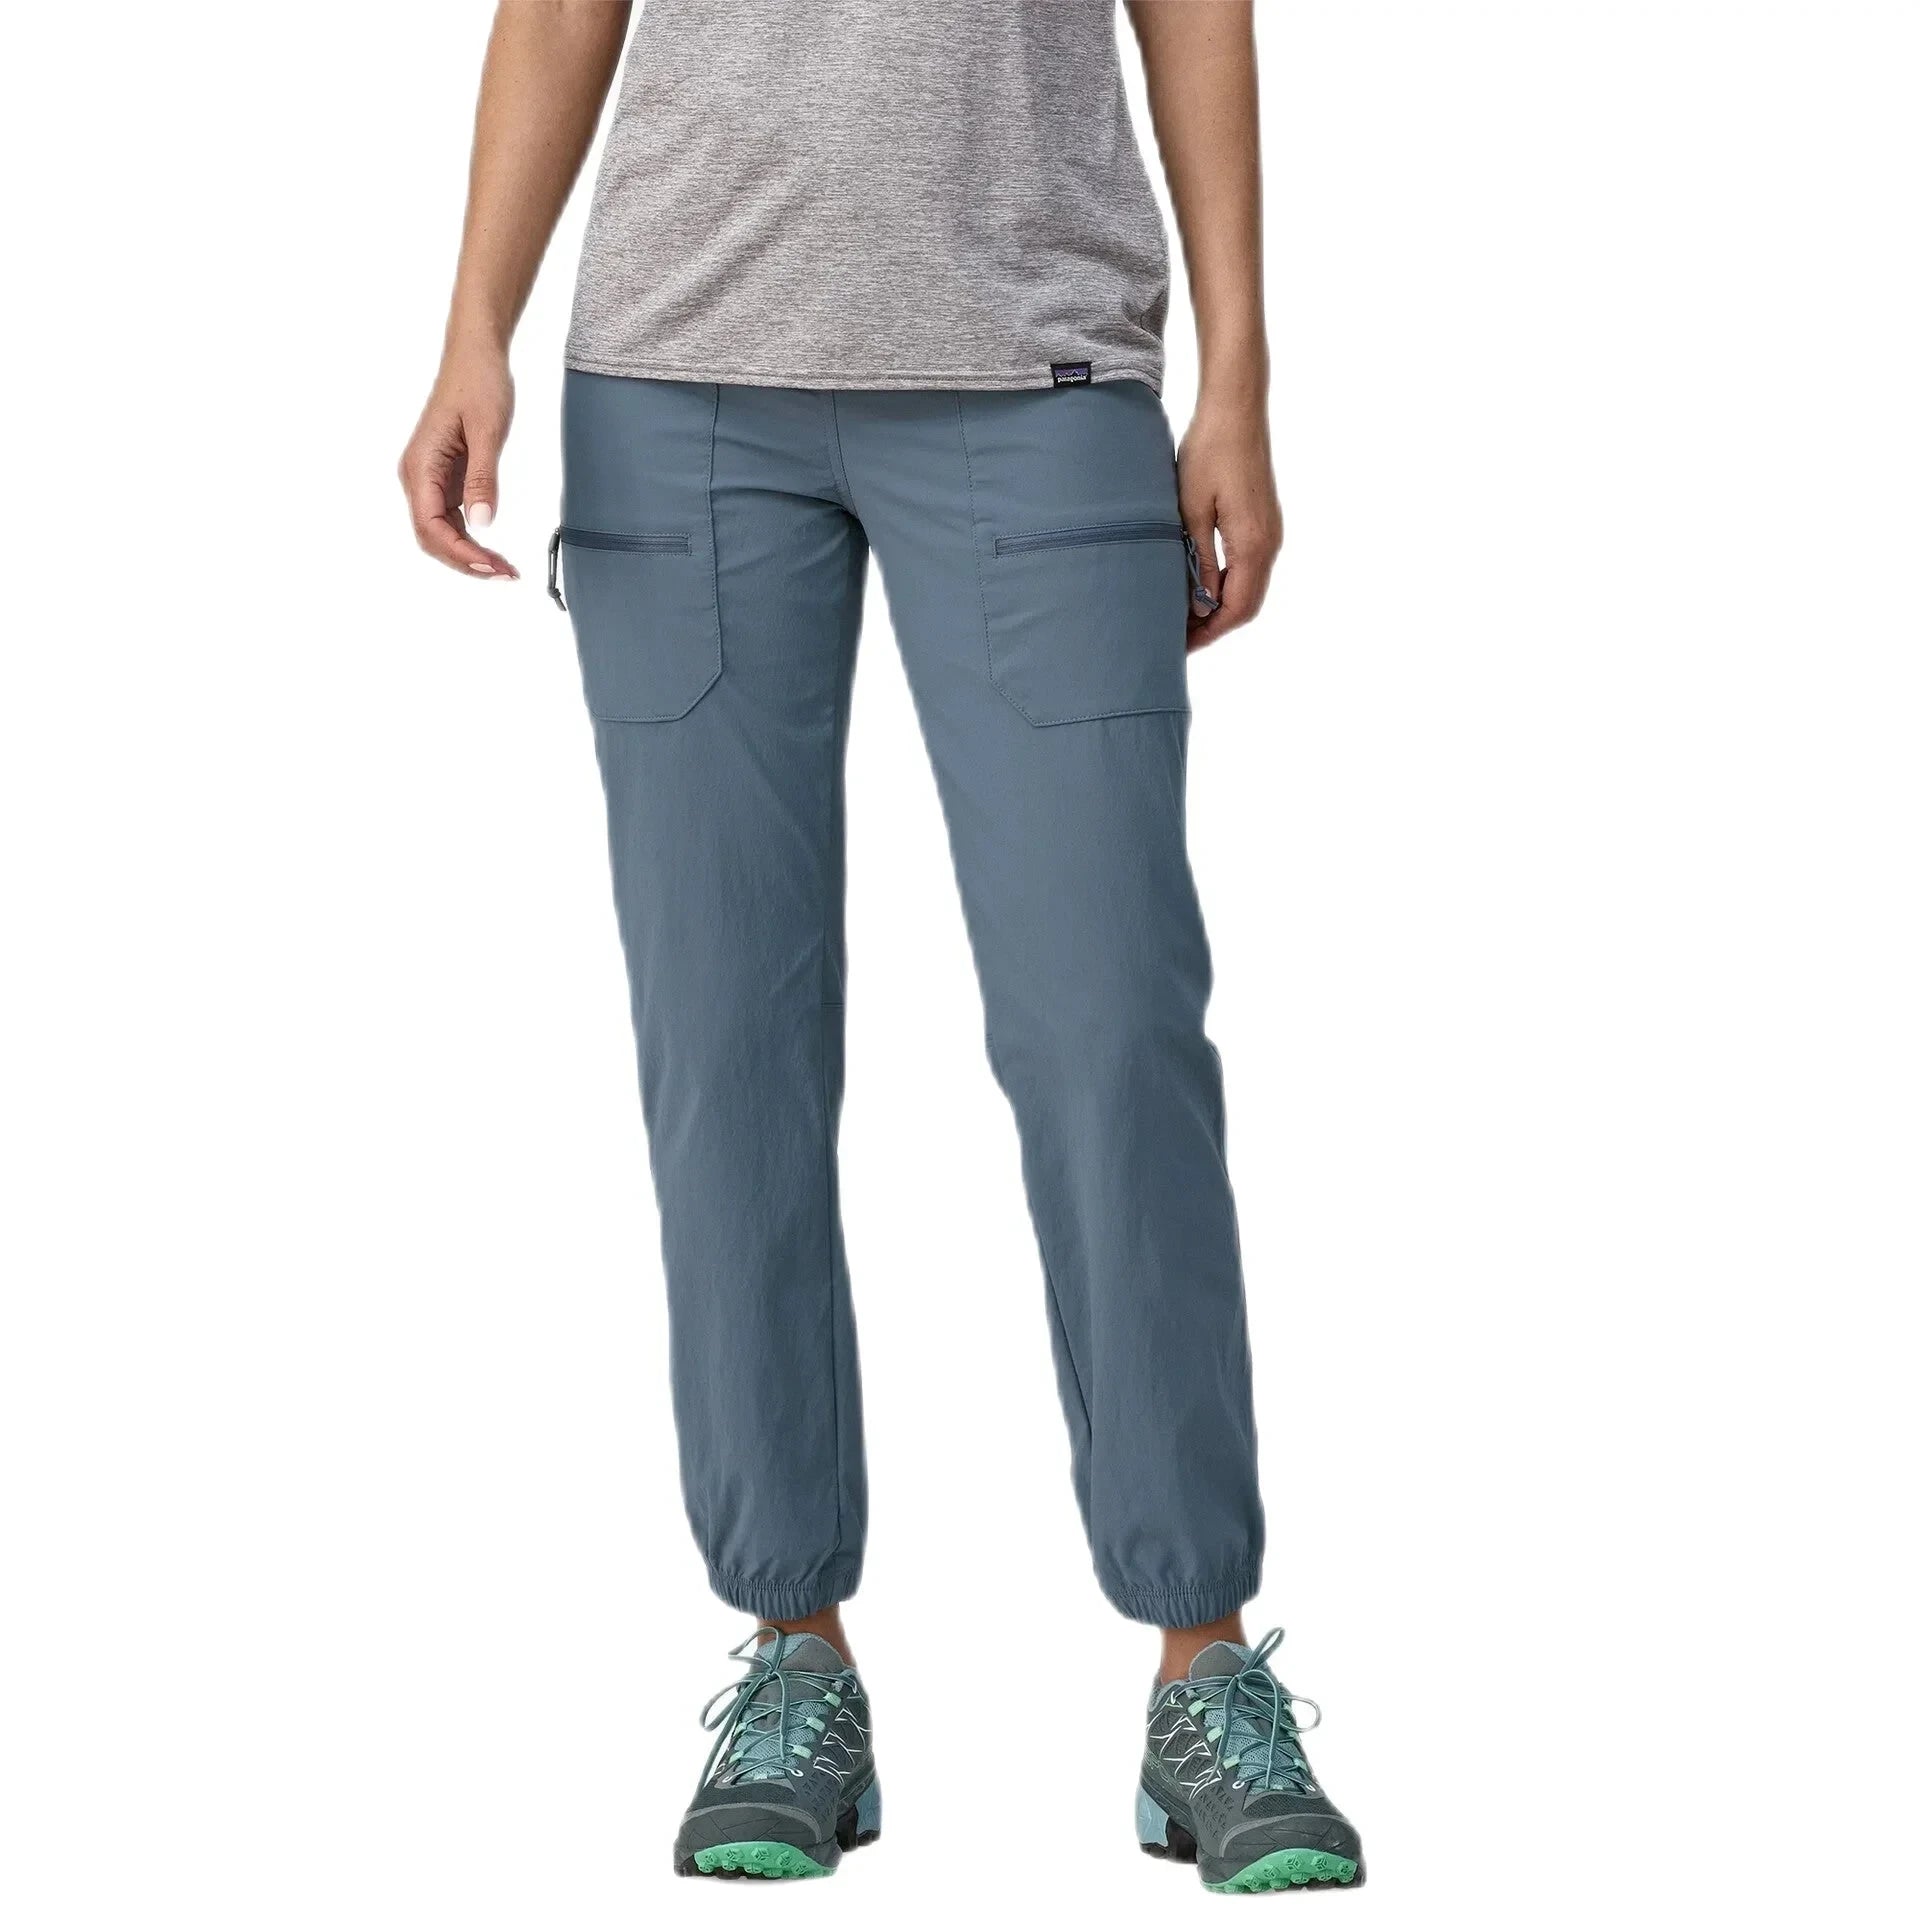 Patagonia W's Quandary Joggers, Utility Blue, front view on model